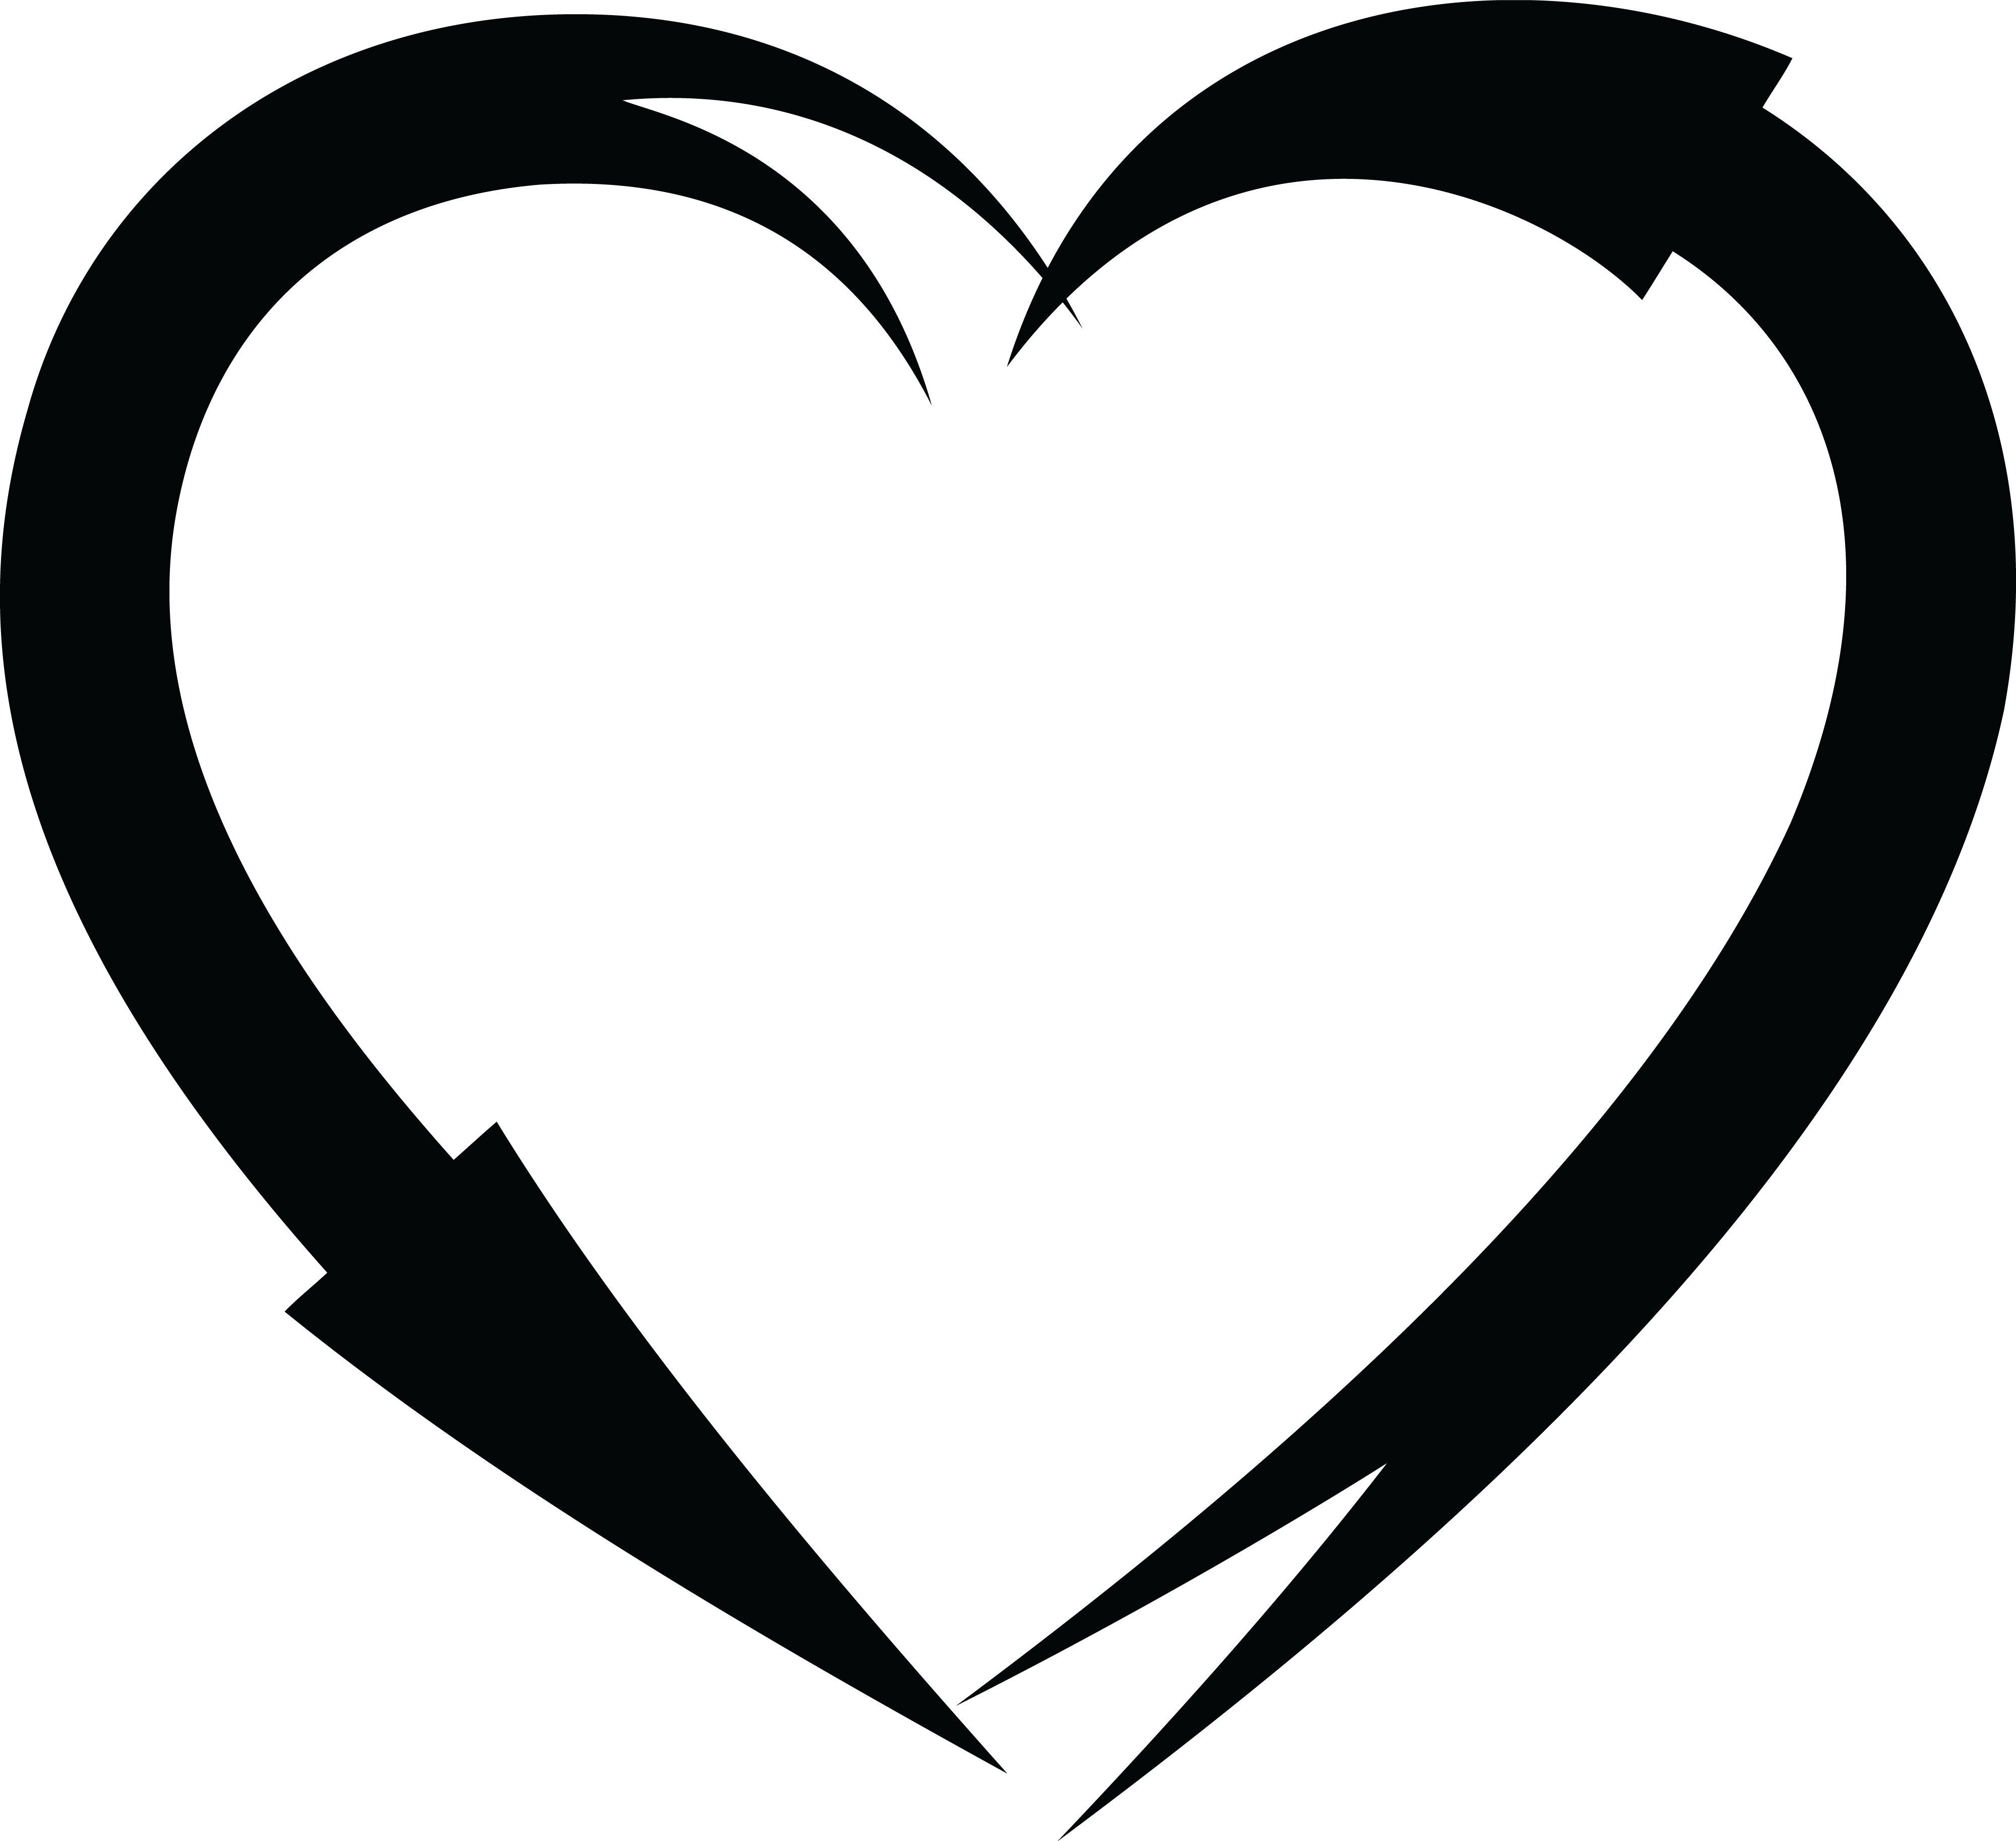 Abstract Black Heart Frame PNG